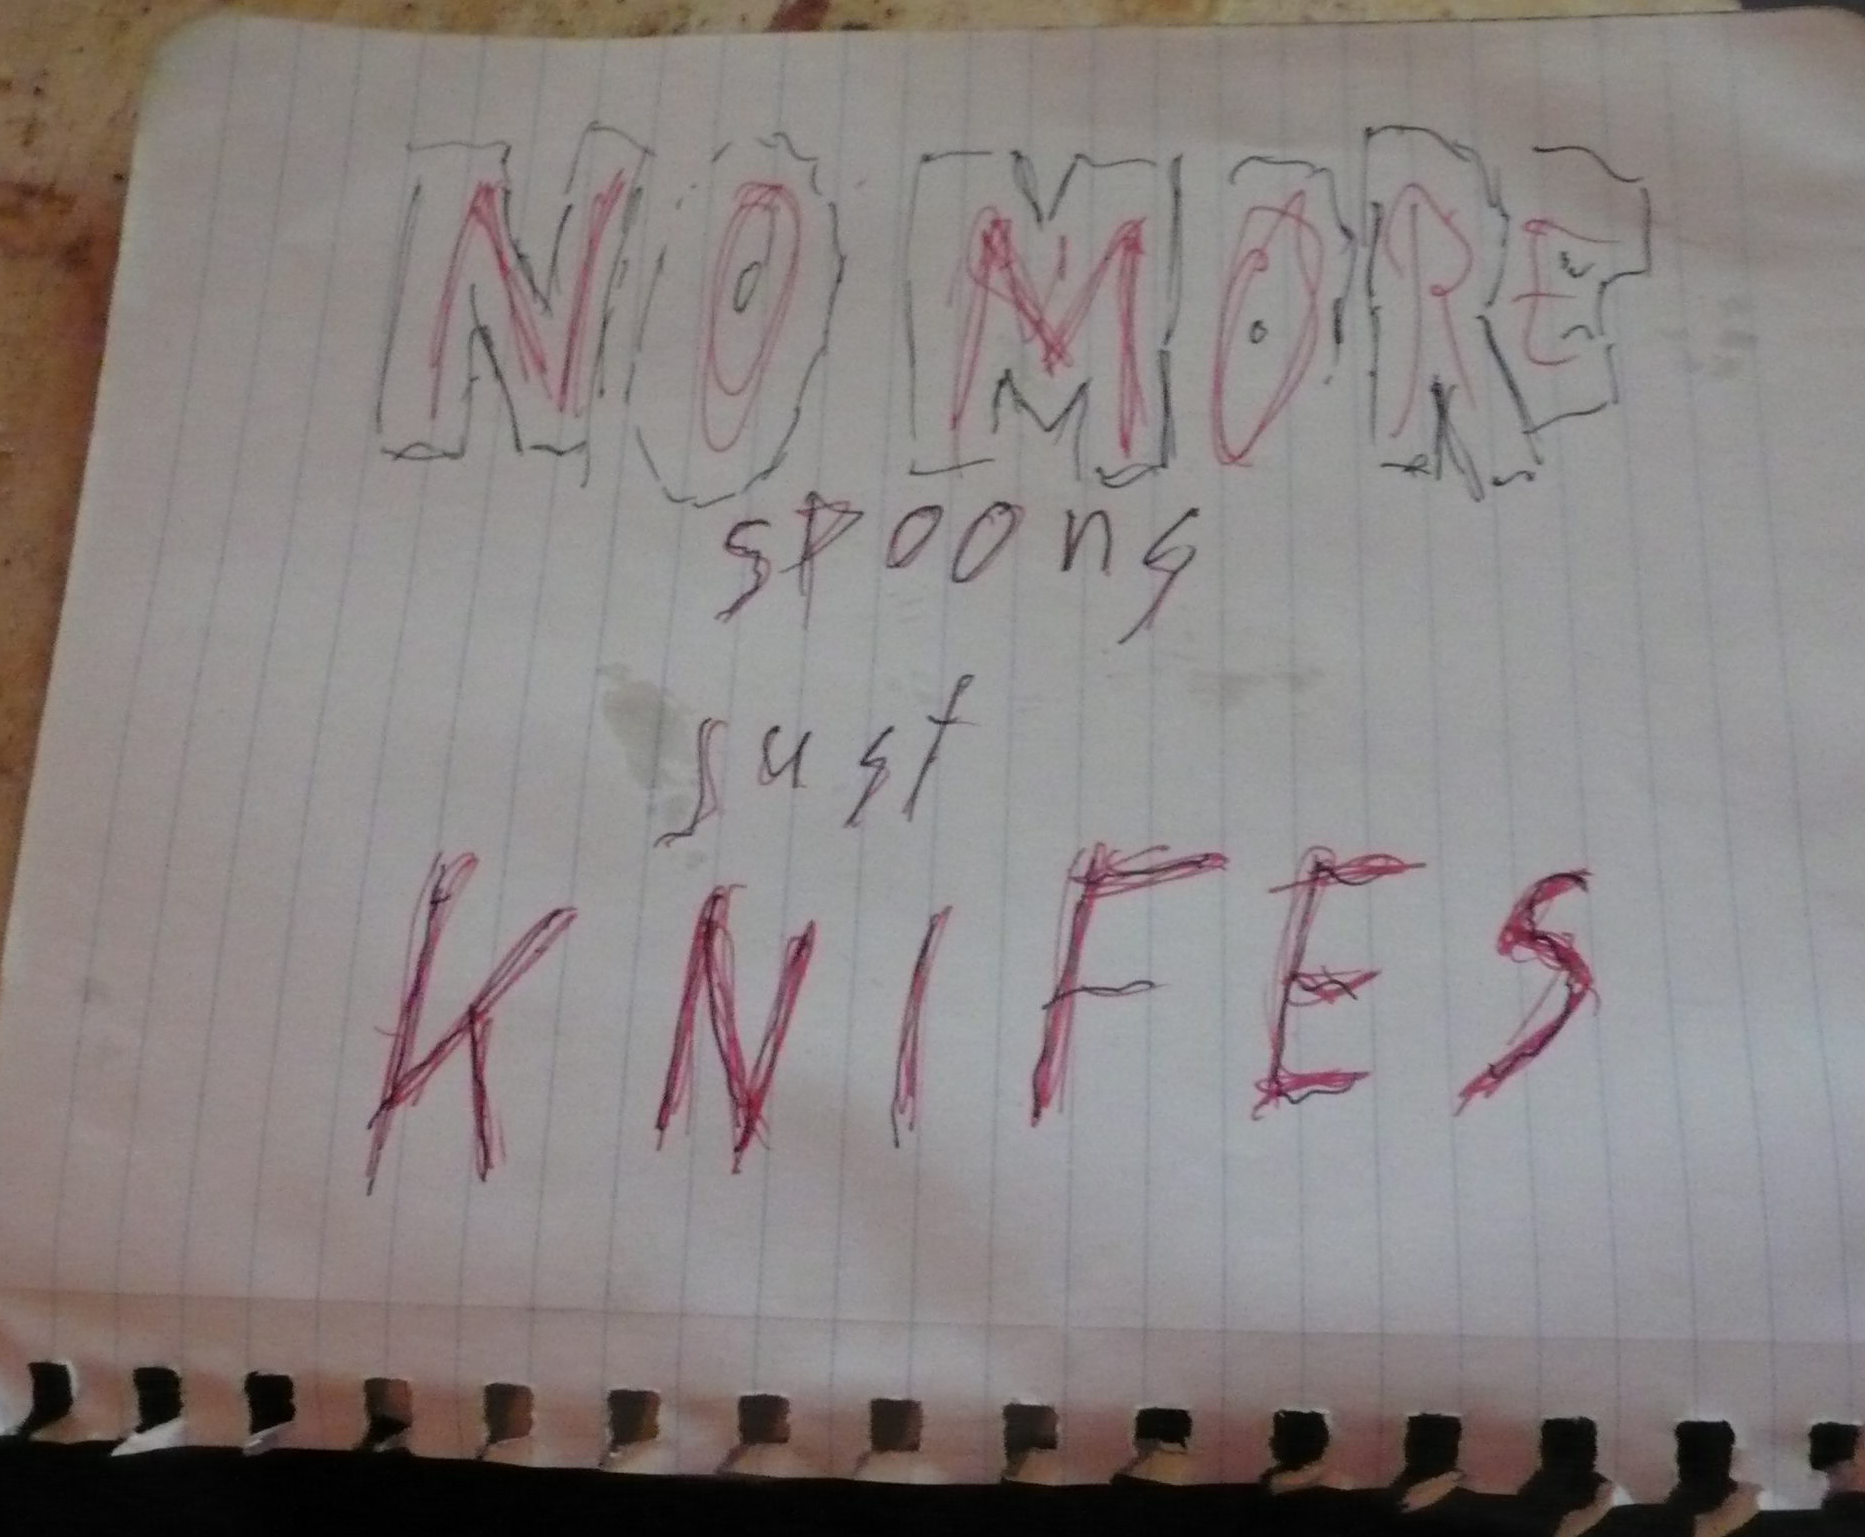 no more spoons just knifes